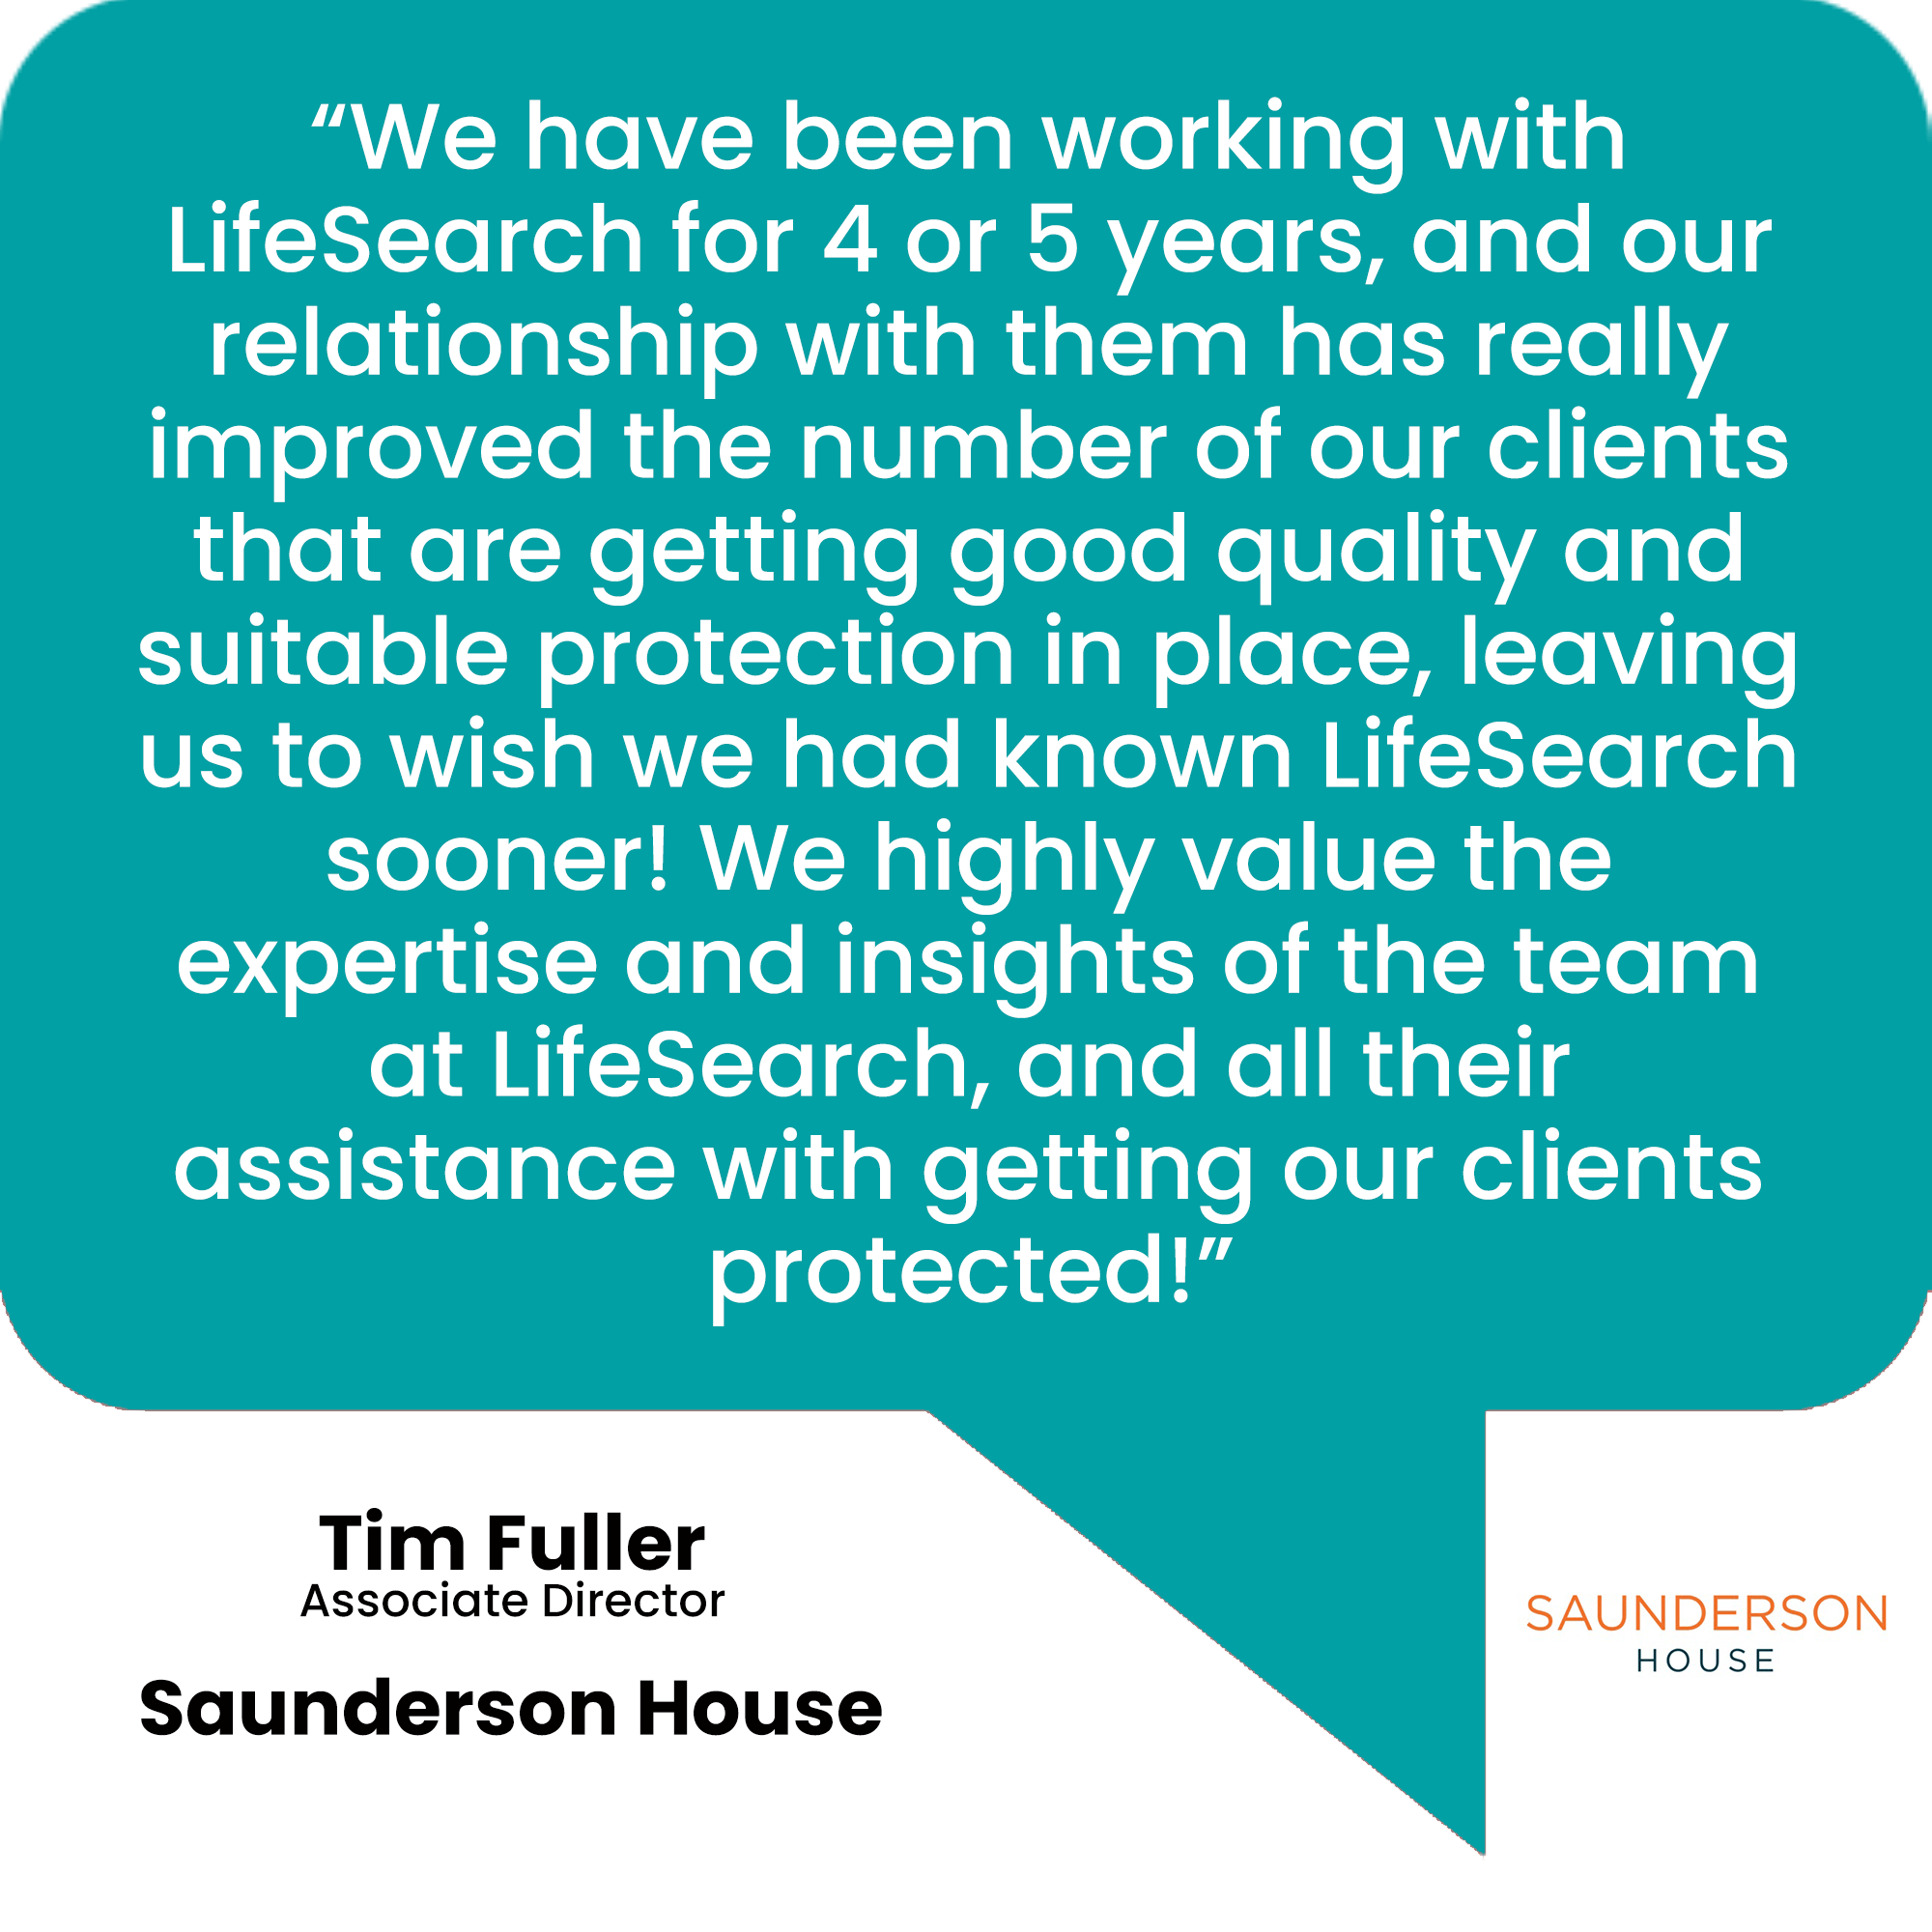 Saunderson House Testimonial about LifeSearch on Teal Background